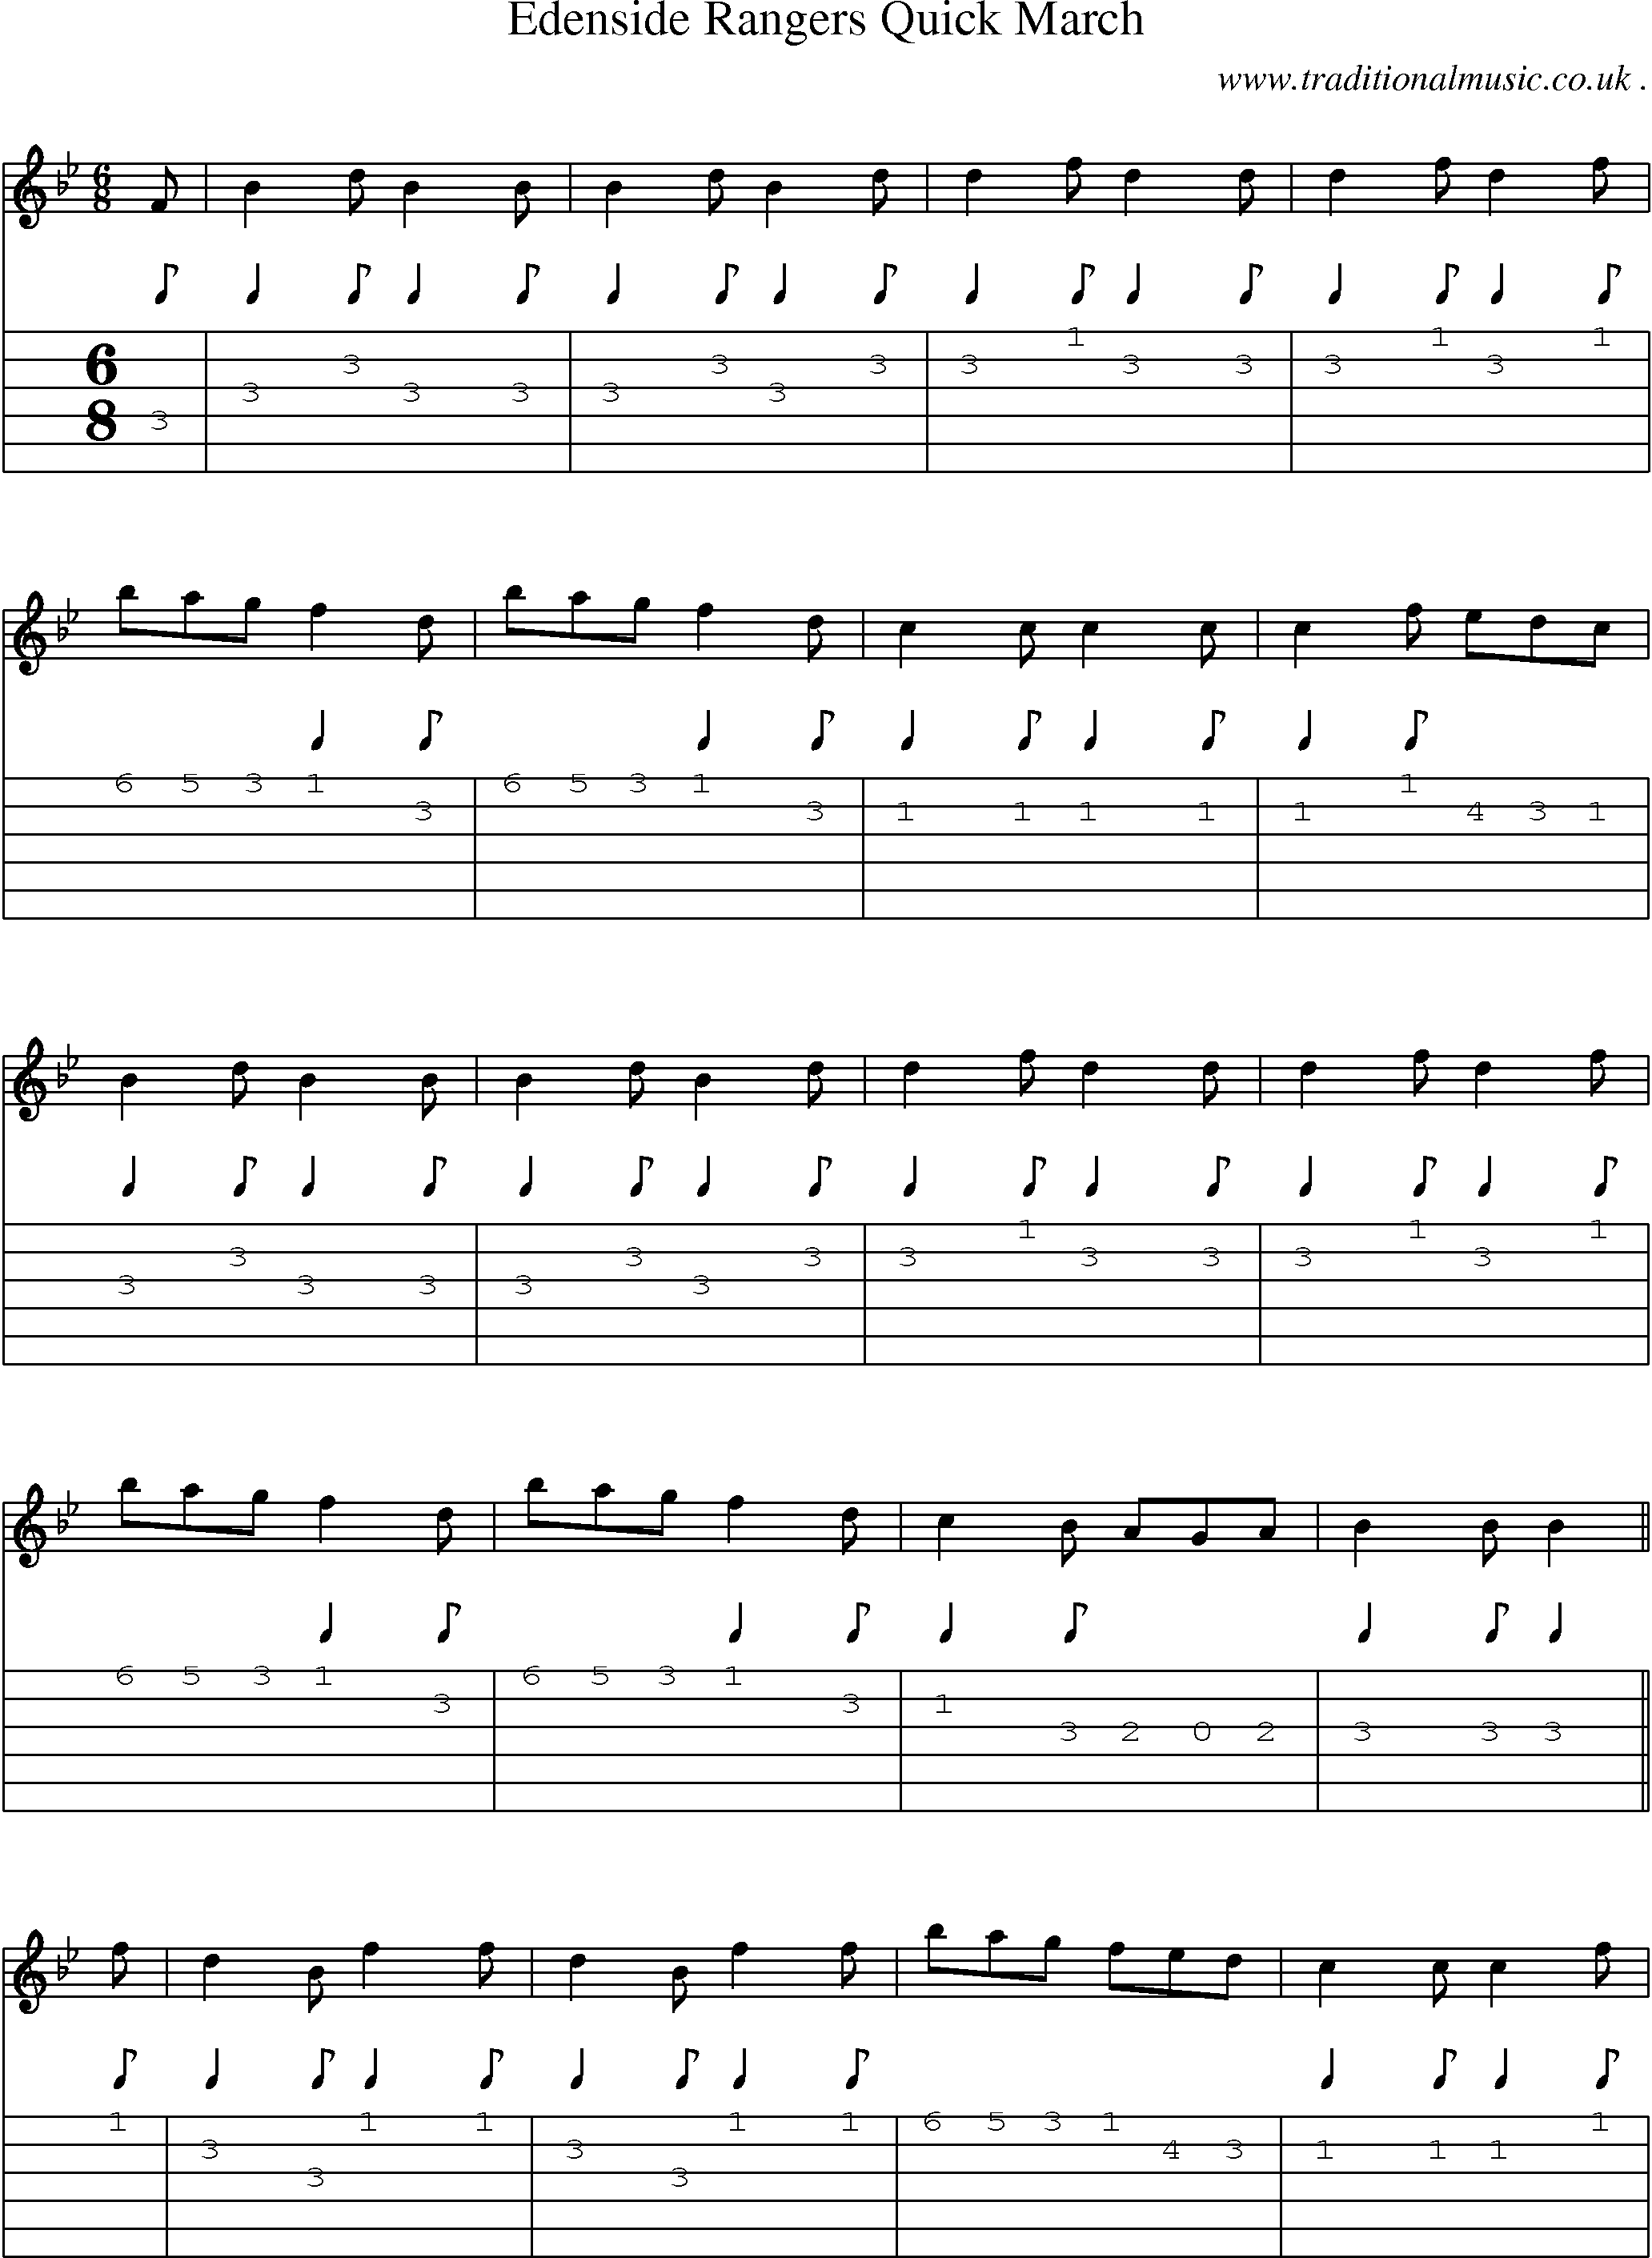 Sheet-Music and Guitar Tabs for Edenside Rangers Quick March